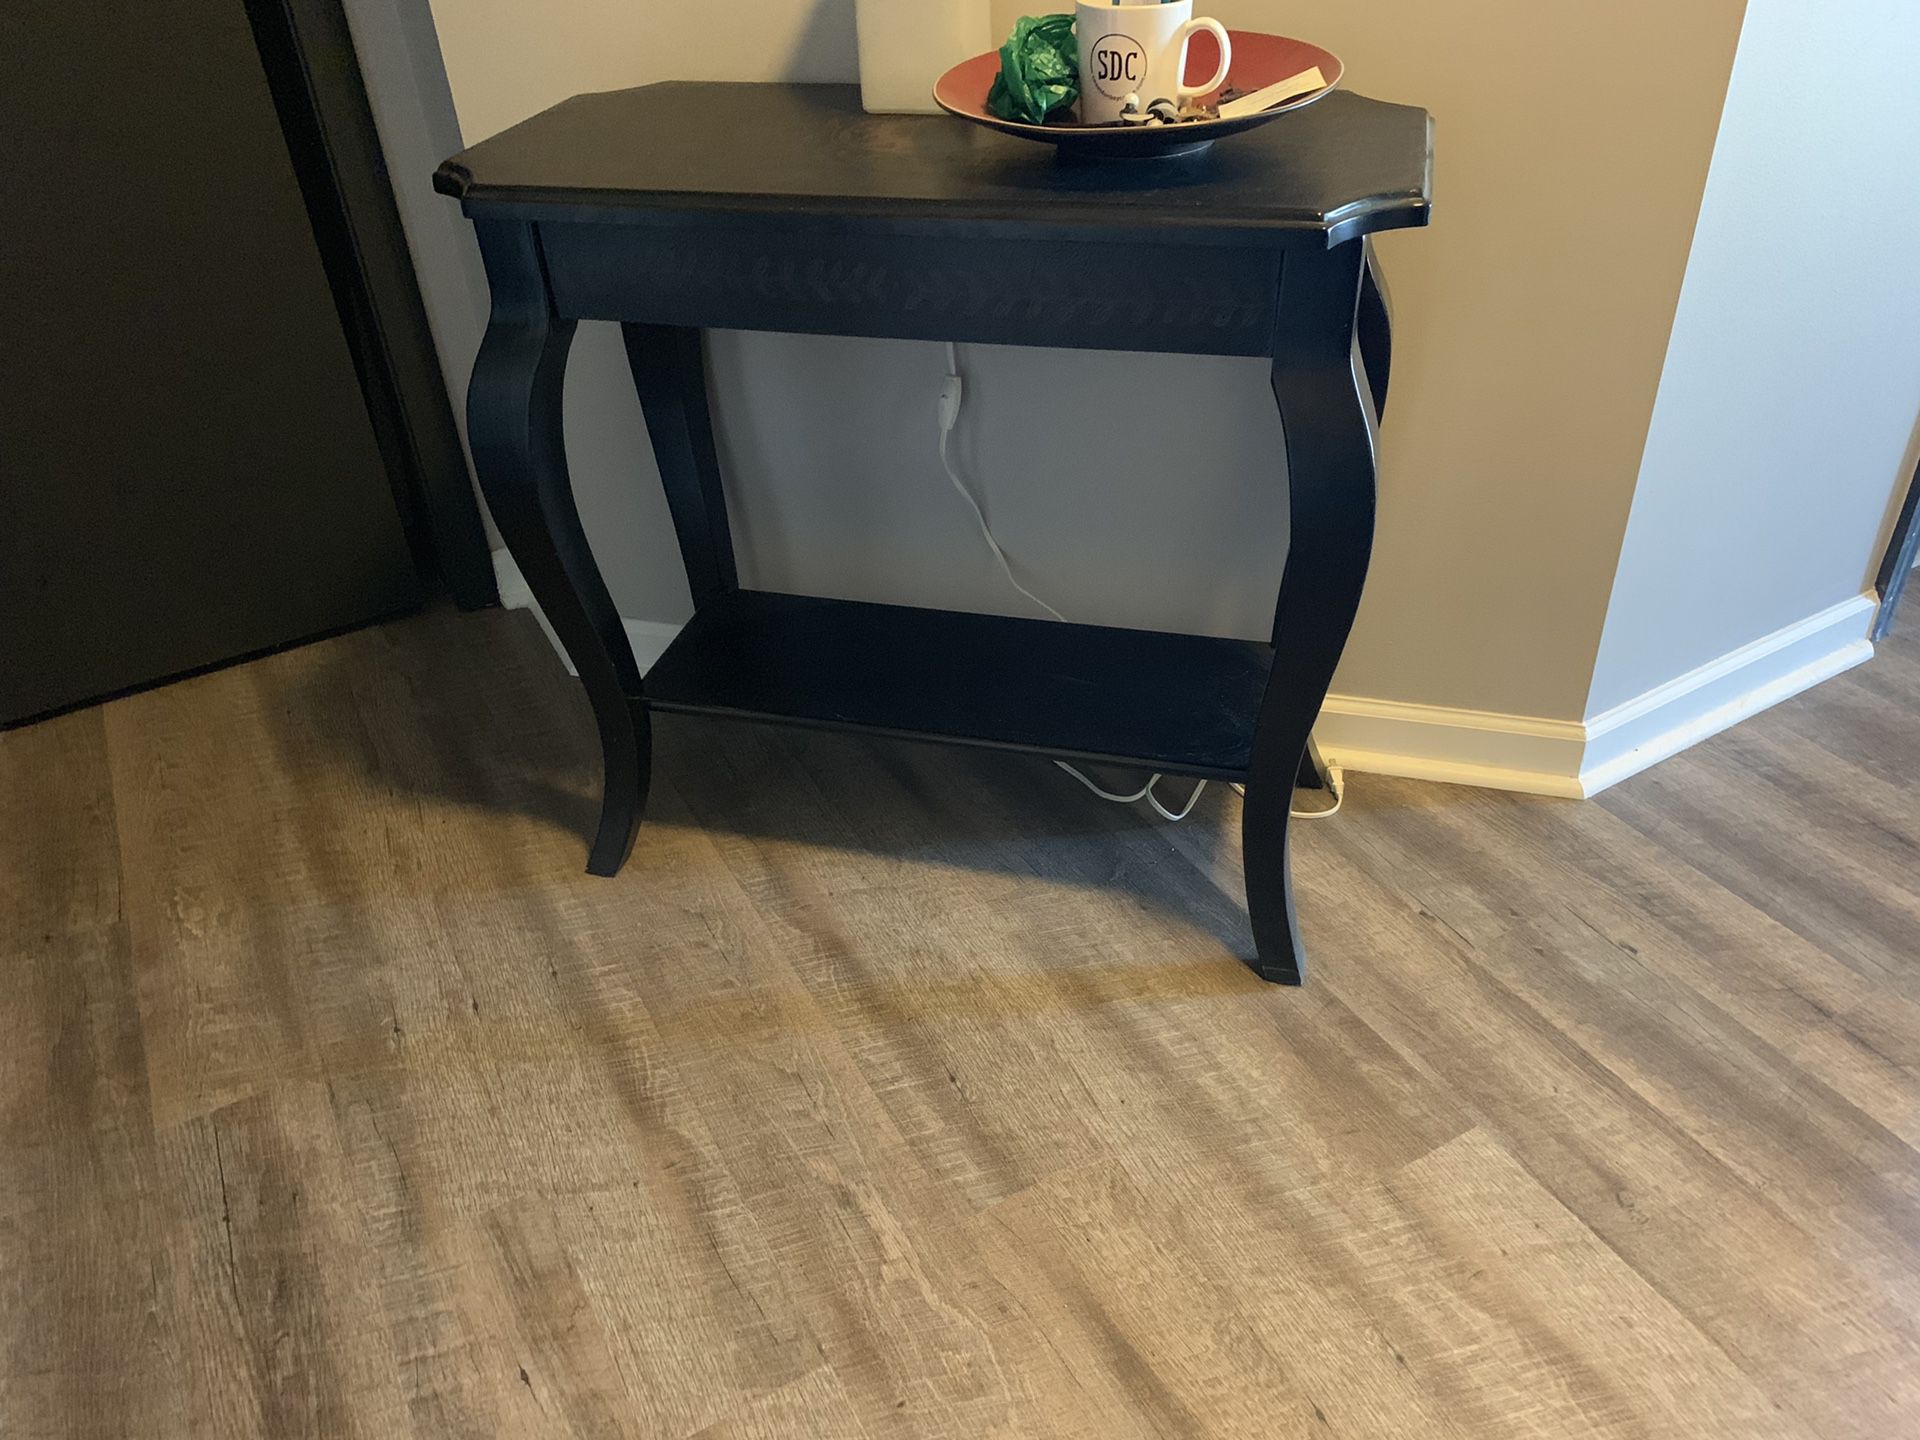 End table, front entry table